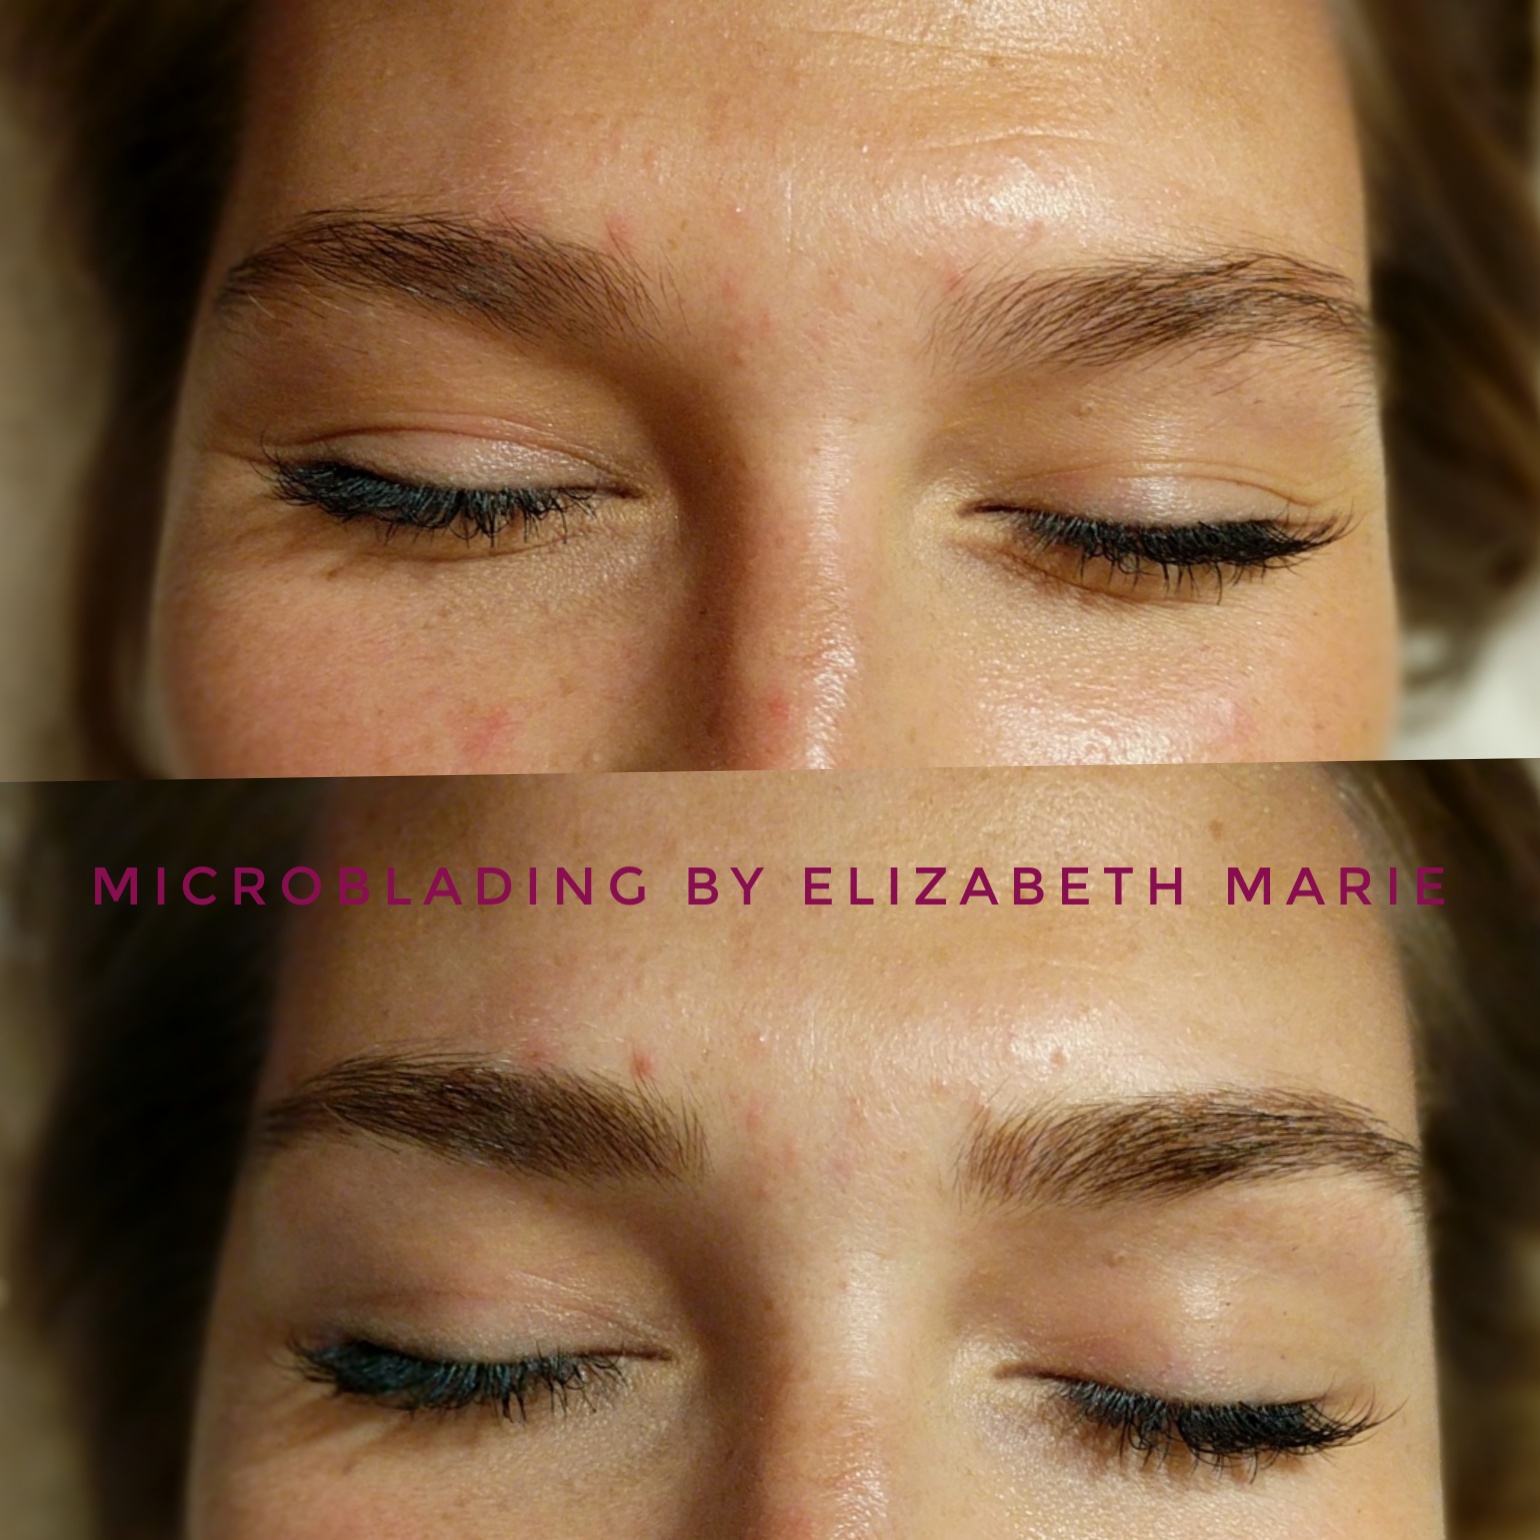 Microblading Frequently Asked Questions. What is Microblading?